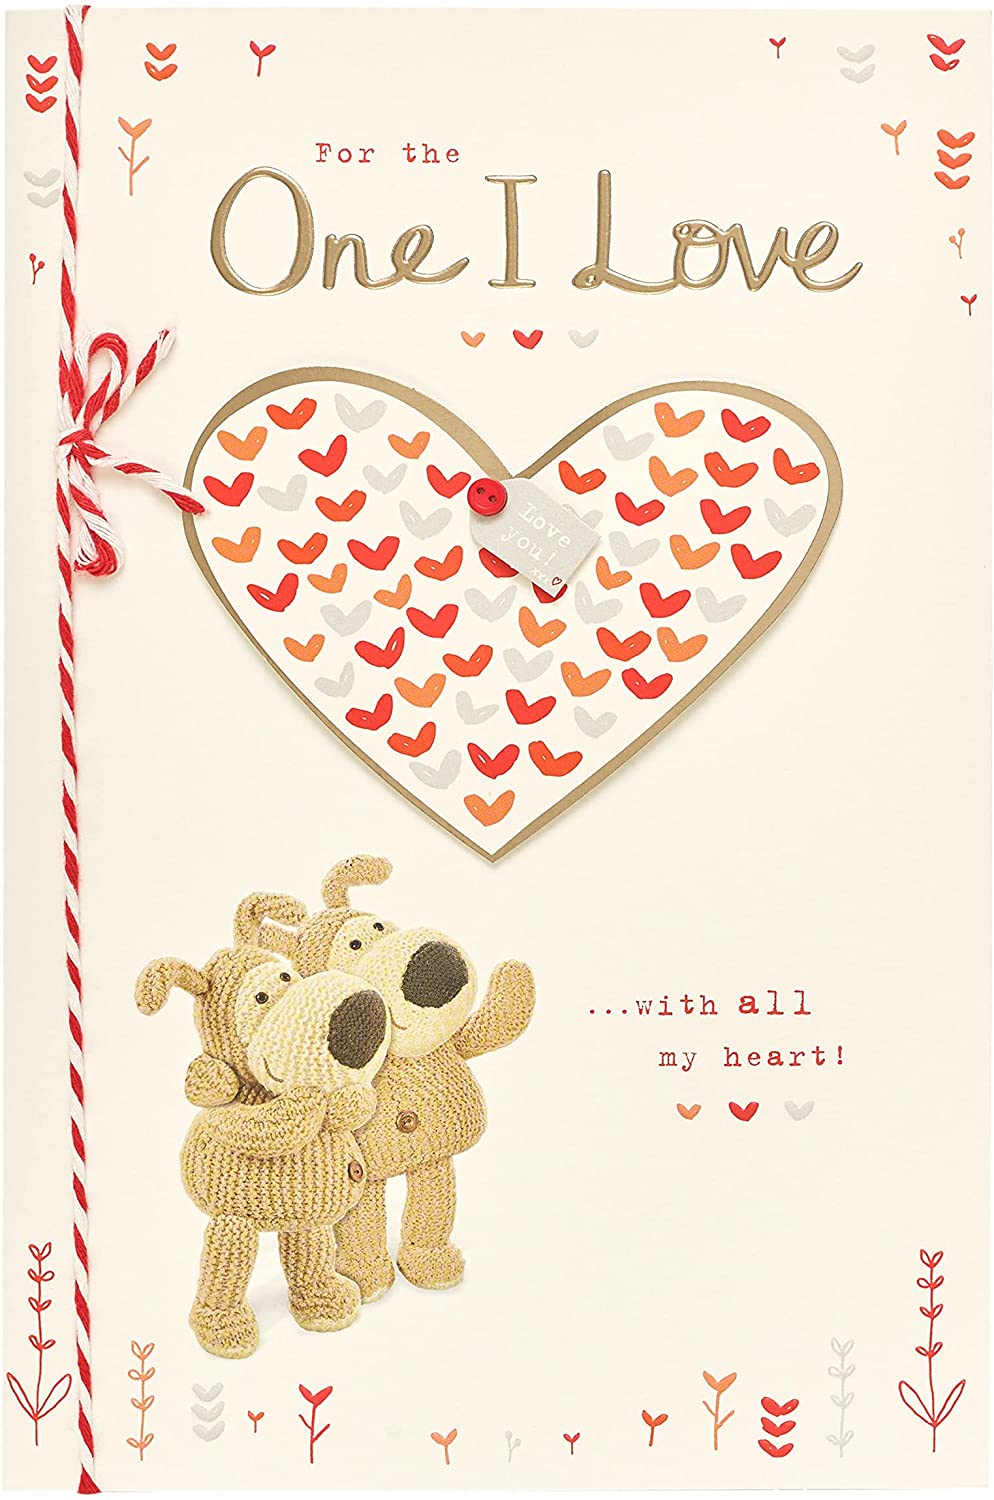 Cute Boofle Birthday Card For The One I Love